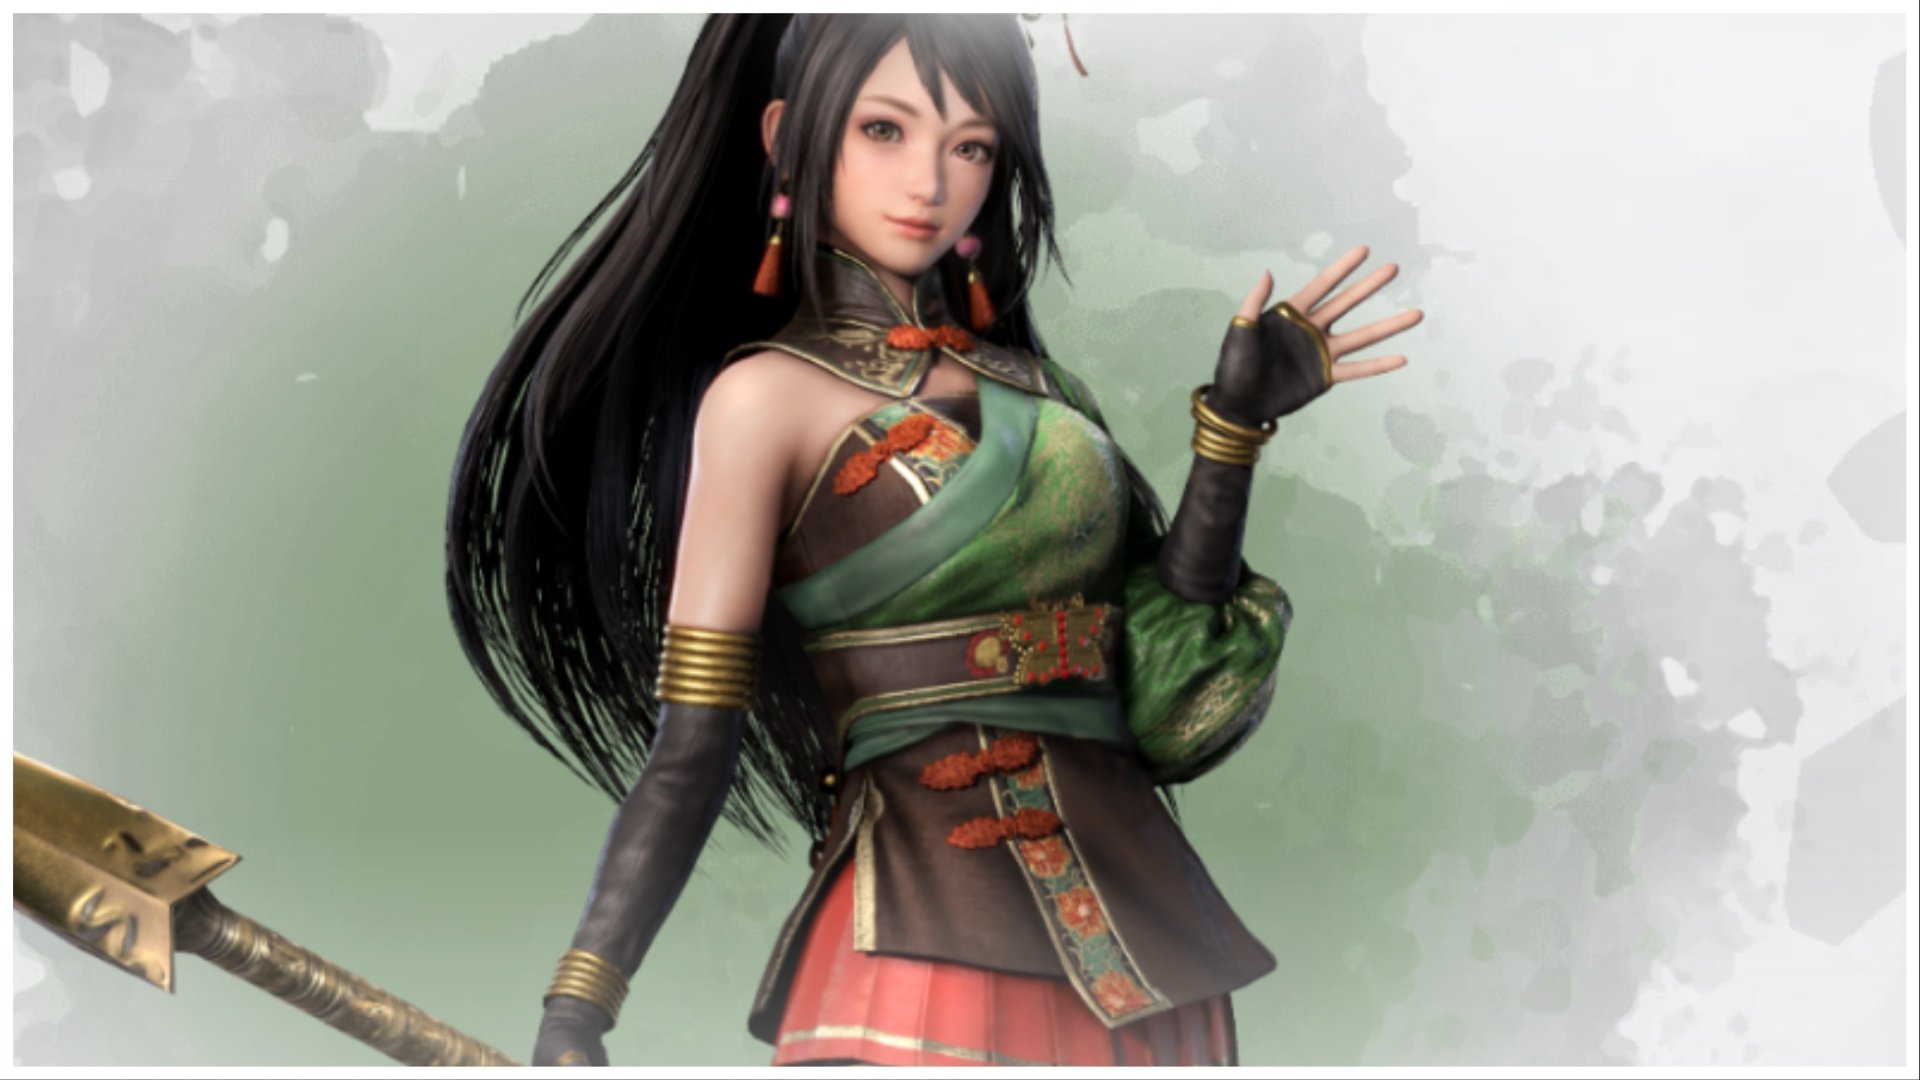 the image shows a female character from the game franchise who is waving to the viewer with a pleasant smile. In her other hand she is holding a pointed spear.